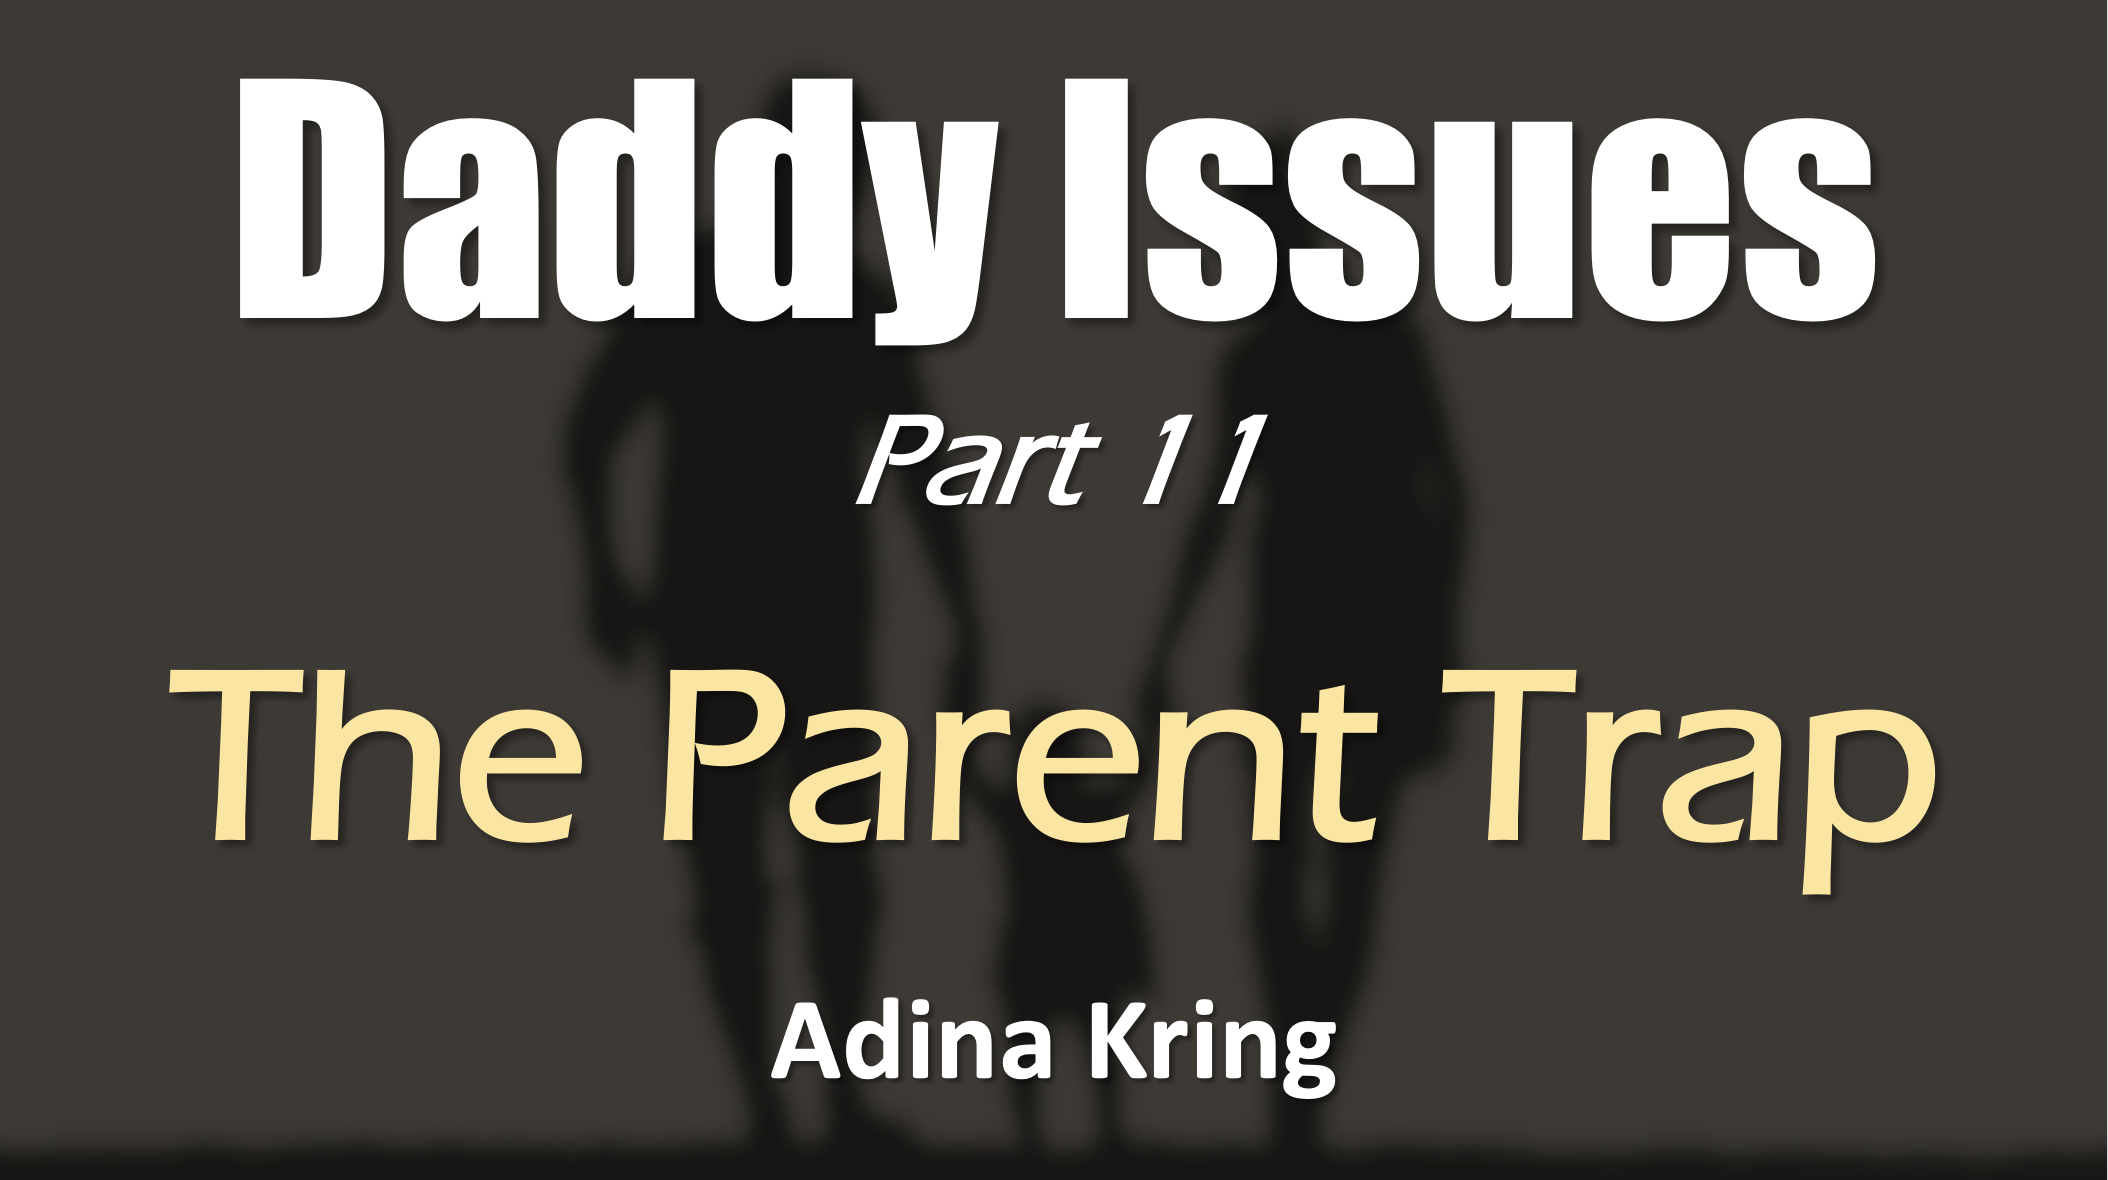 Daddy Issues Part 11- The Parent Trap